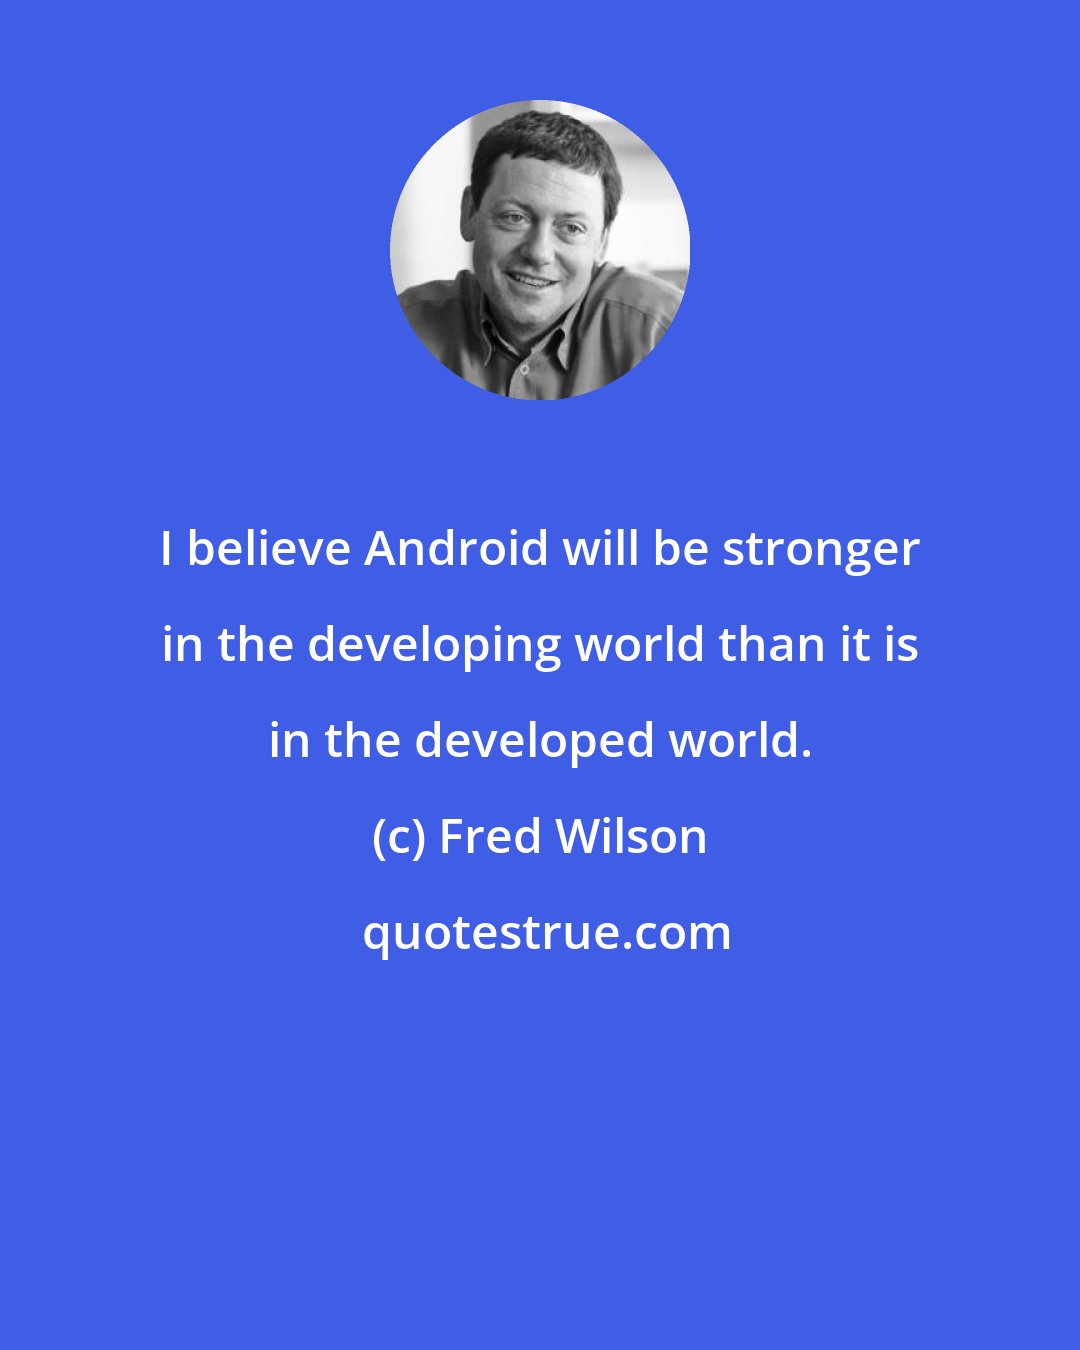 Fred Wilson: I believe Android will be stronger in the developing world than it is in the developed world.